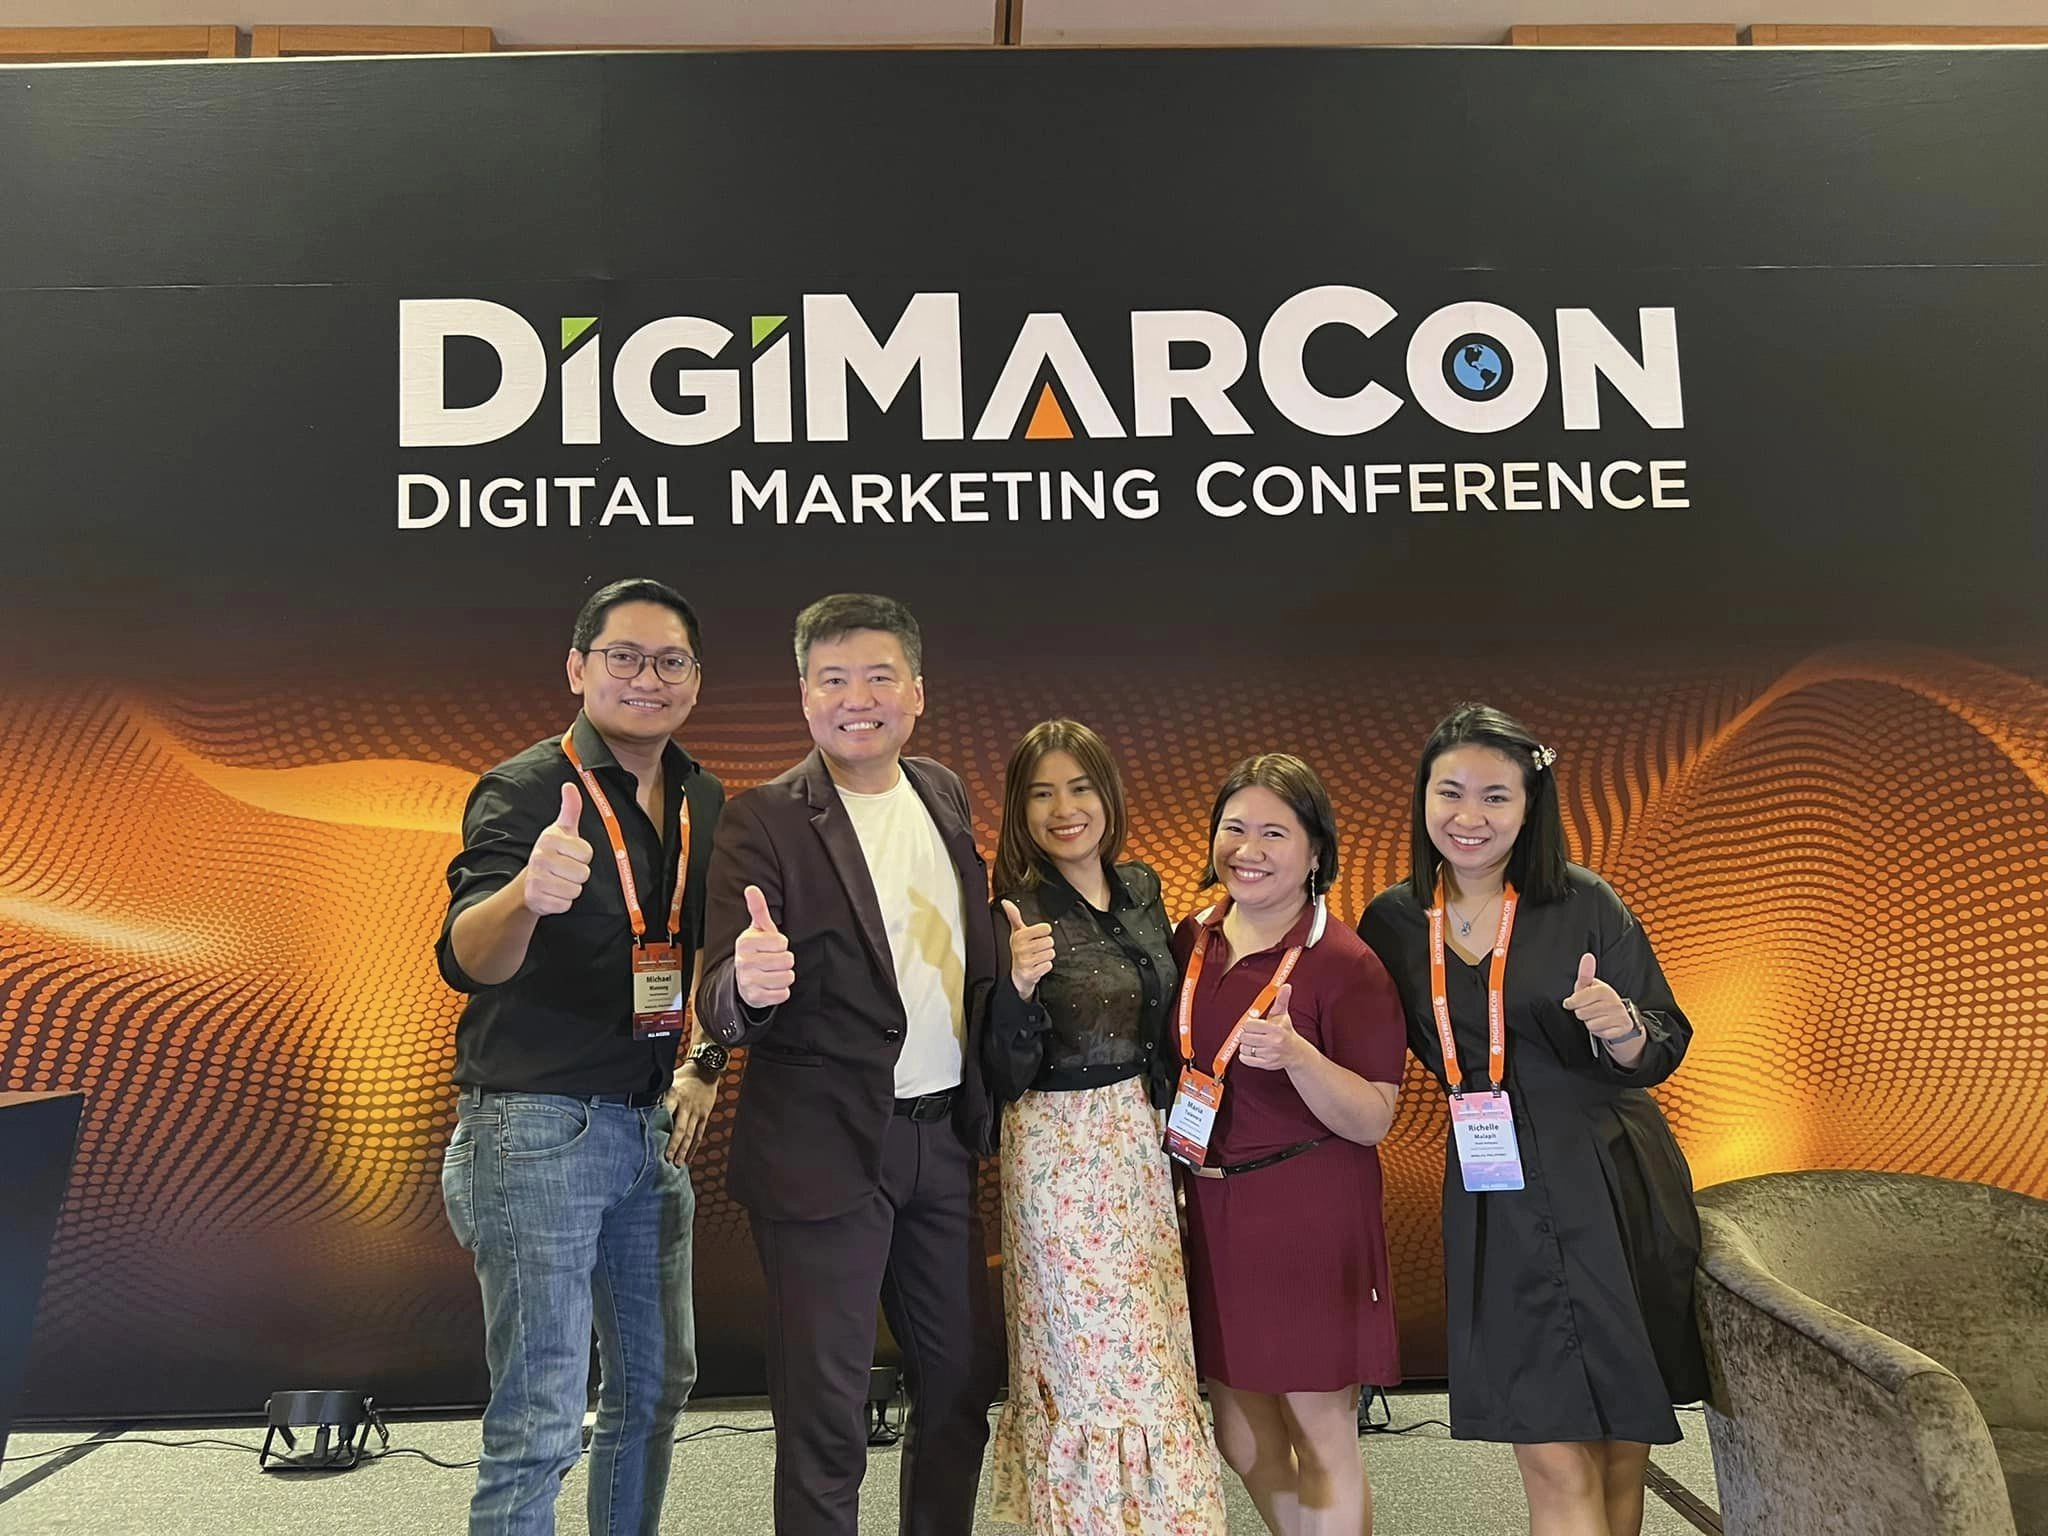 MPH team represented by Michael, the master of ceremony, Sharie, Maria, and Richelle at DigiMarcon (Digital Marketing Conference) Singapore